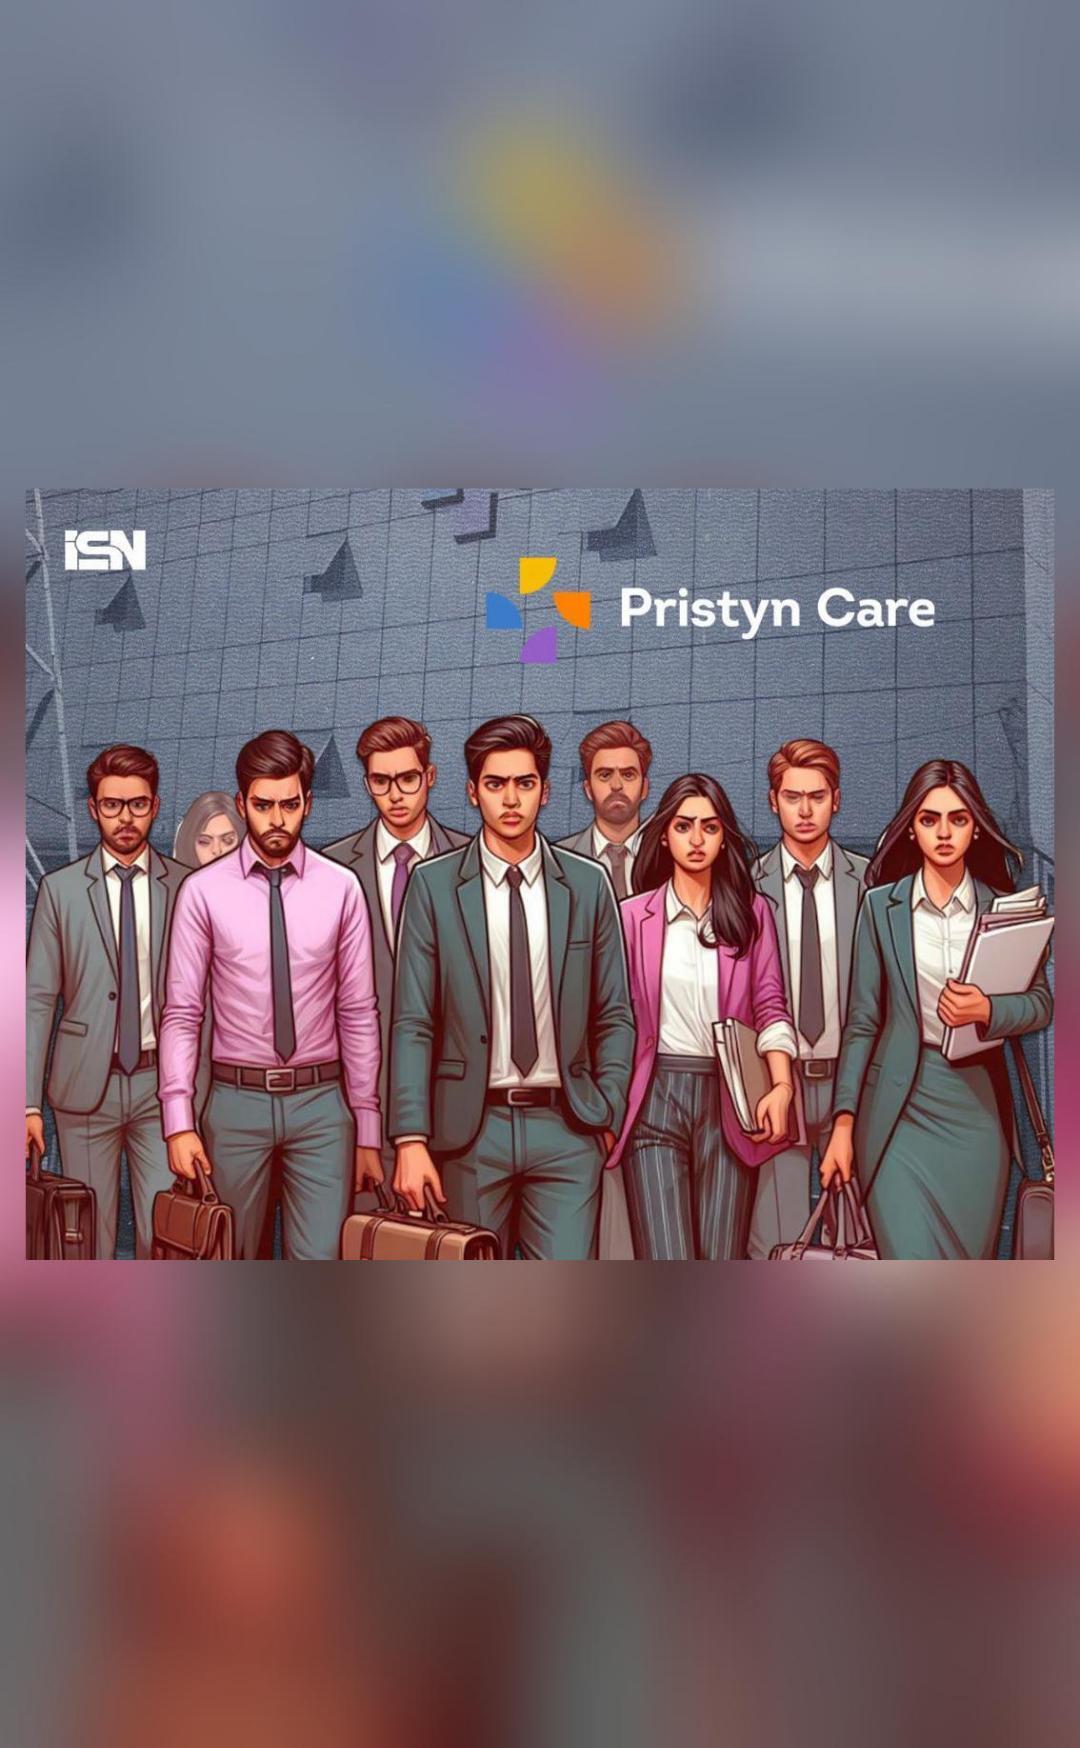 Unicorn Pristyn Care lays off 120 employees to become profitable